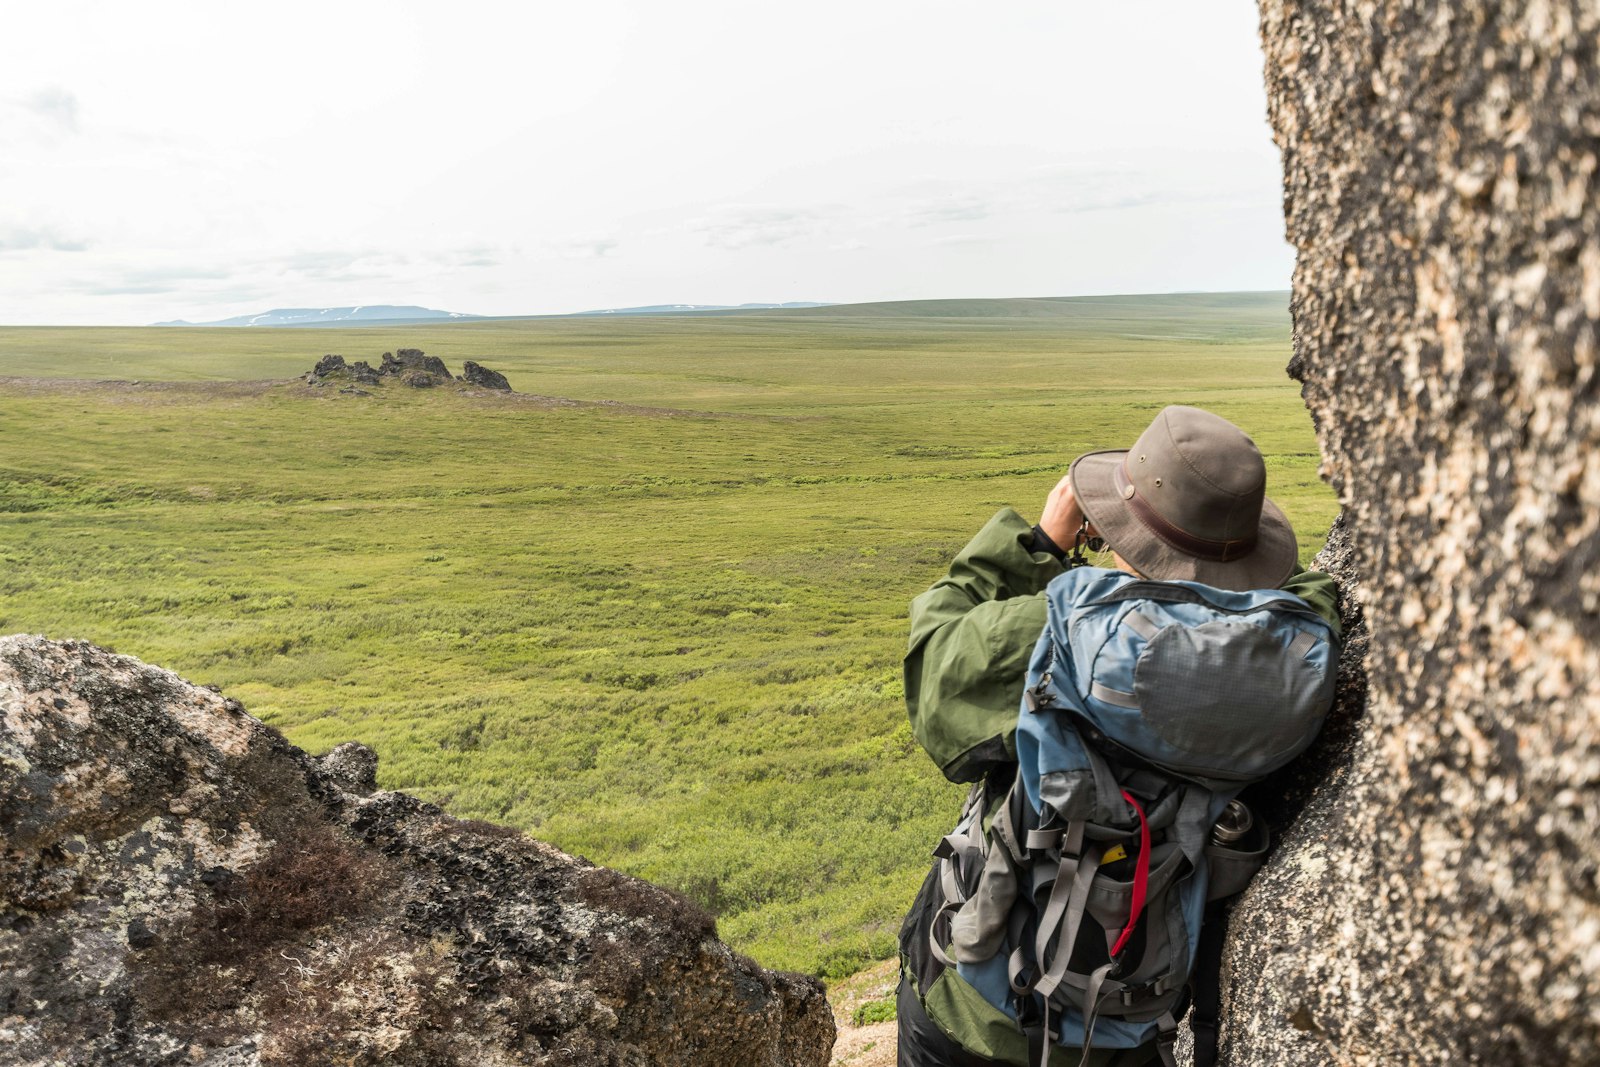 From behind, a female hiker leans against a tor and uses binoculars to look across a vast green landscape.